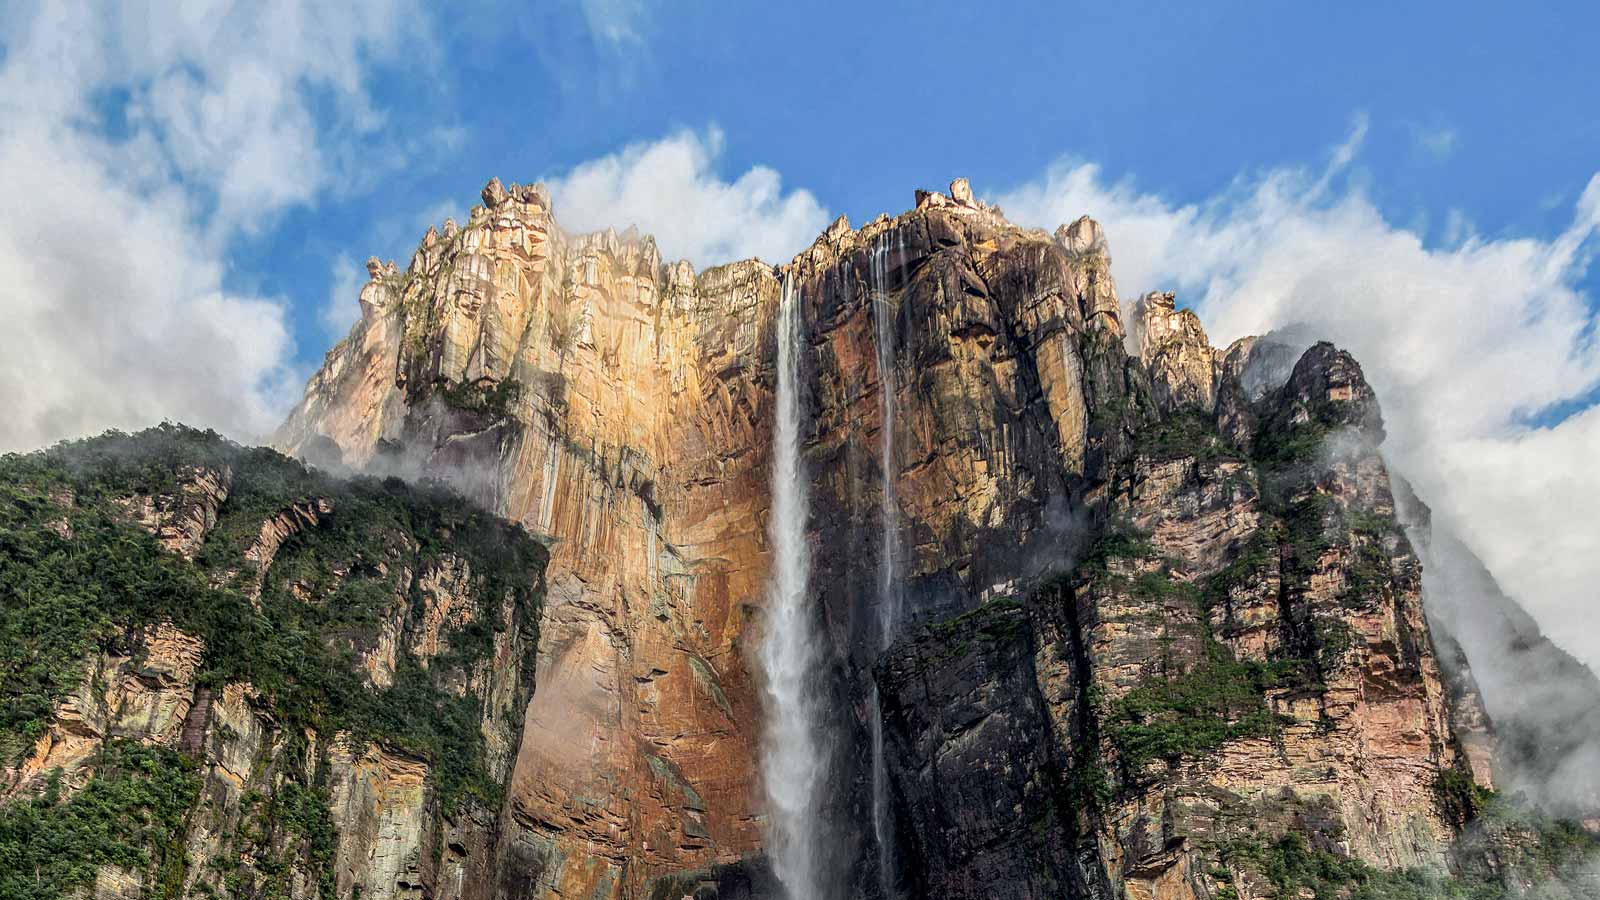 <p><span>Angel Falls is Venezuela’s highest waterfall, at 3,212 feet—15 times taller than Niagara Falls. The water from the Churun River plunges freely over a mountain edge into whitewater rapids below, followed by a second 30-meter drop.</span></p><p><span>Reaching the falls is an adventure in itself. First, take a small plane to the town of Canaima, followed by a one-day boat ride to the falls, and you’ll finally arrive at what can only be described as heaven.</span></p>